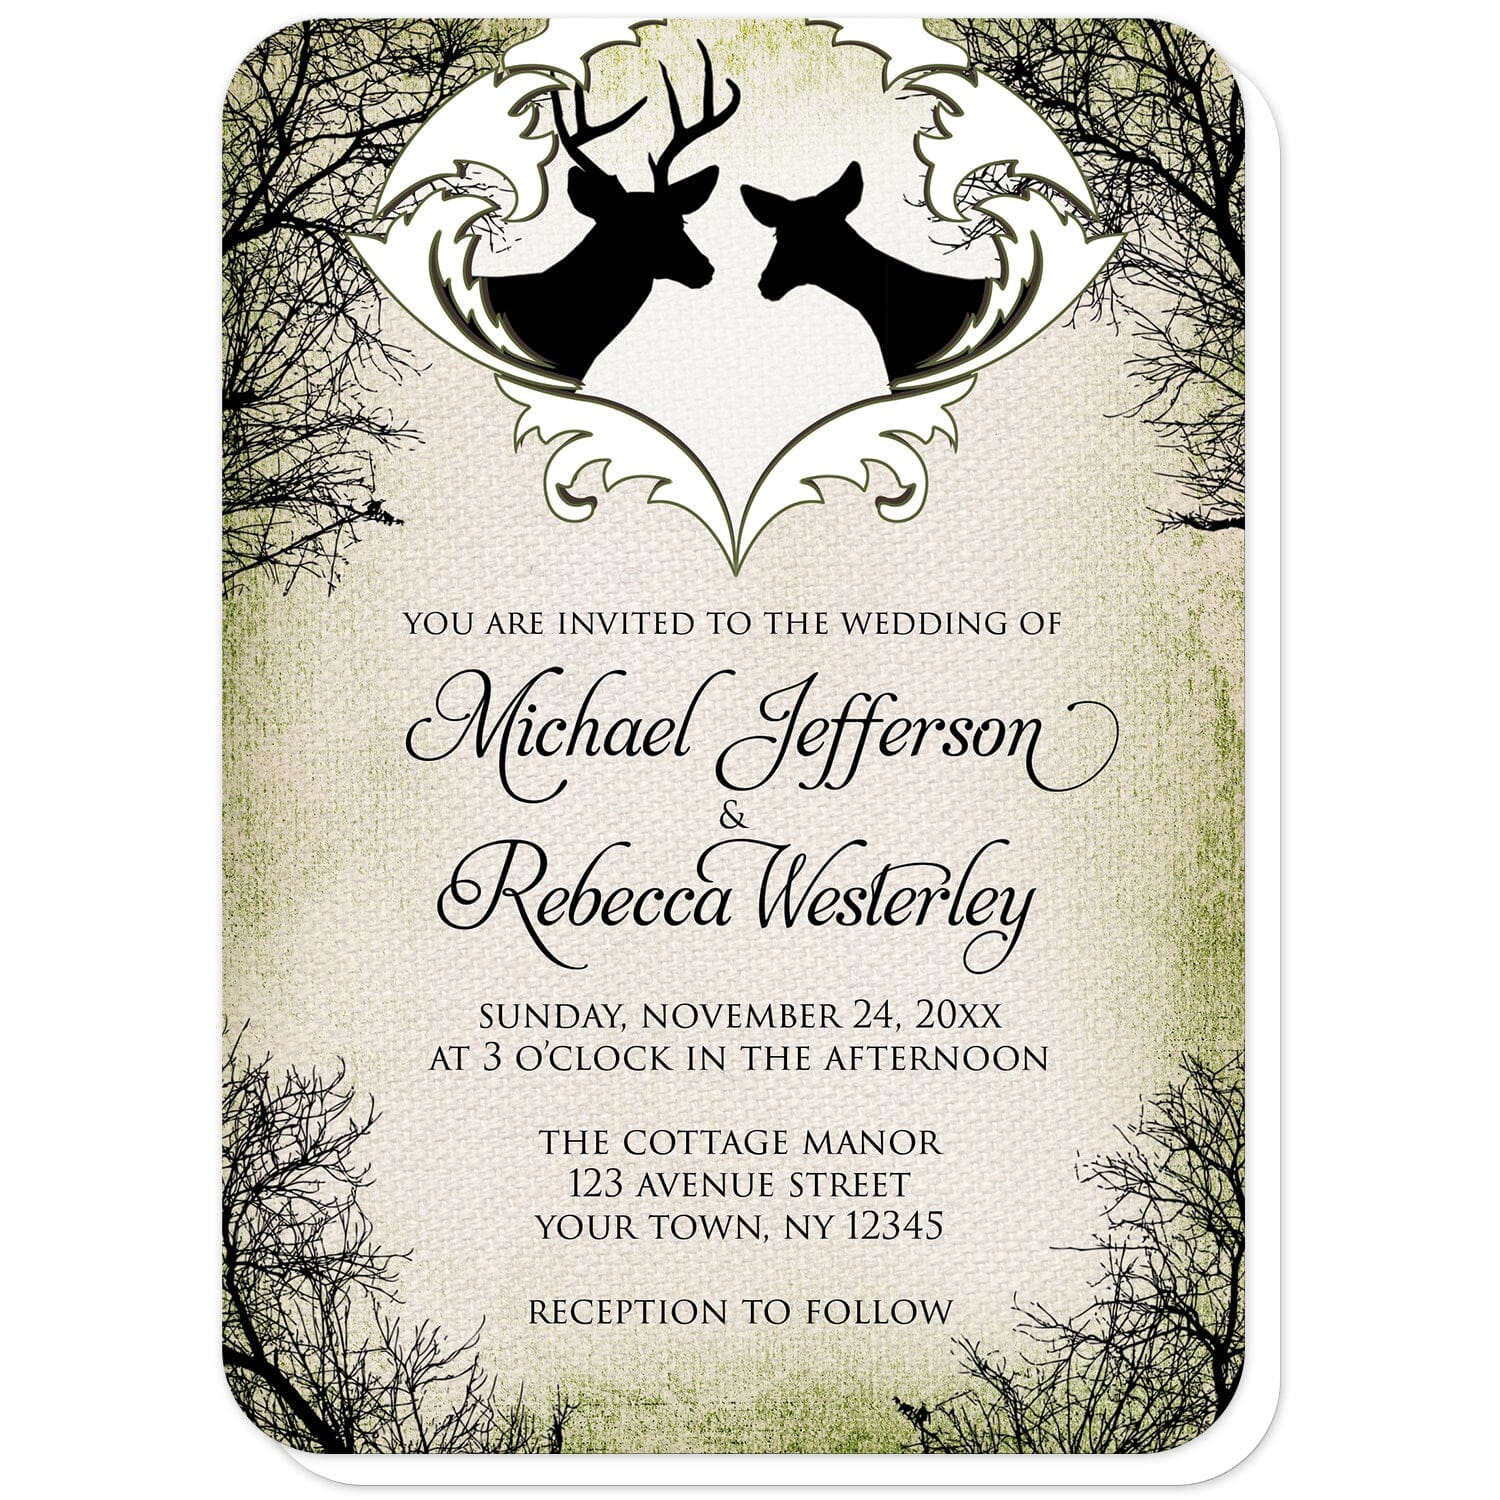 Rustic Deer Frame Canvas Wedding Invitations (with rounded corners) at Artistically Invited. Rustic deer frame canvas wedding invitations designed with black silhouettes of a buck with antlers and a doe in a white frame design at the top, over a rustic brown and green canvas design bordered with winter tree silhouettes. Your personalized marriage celebration details are custom printed in black below the deer over the canvas background design.